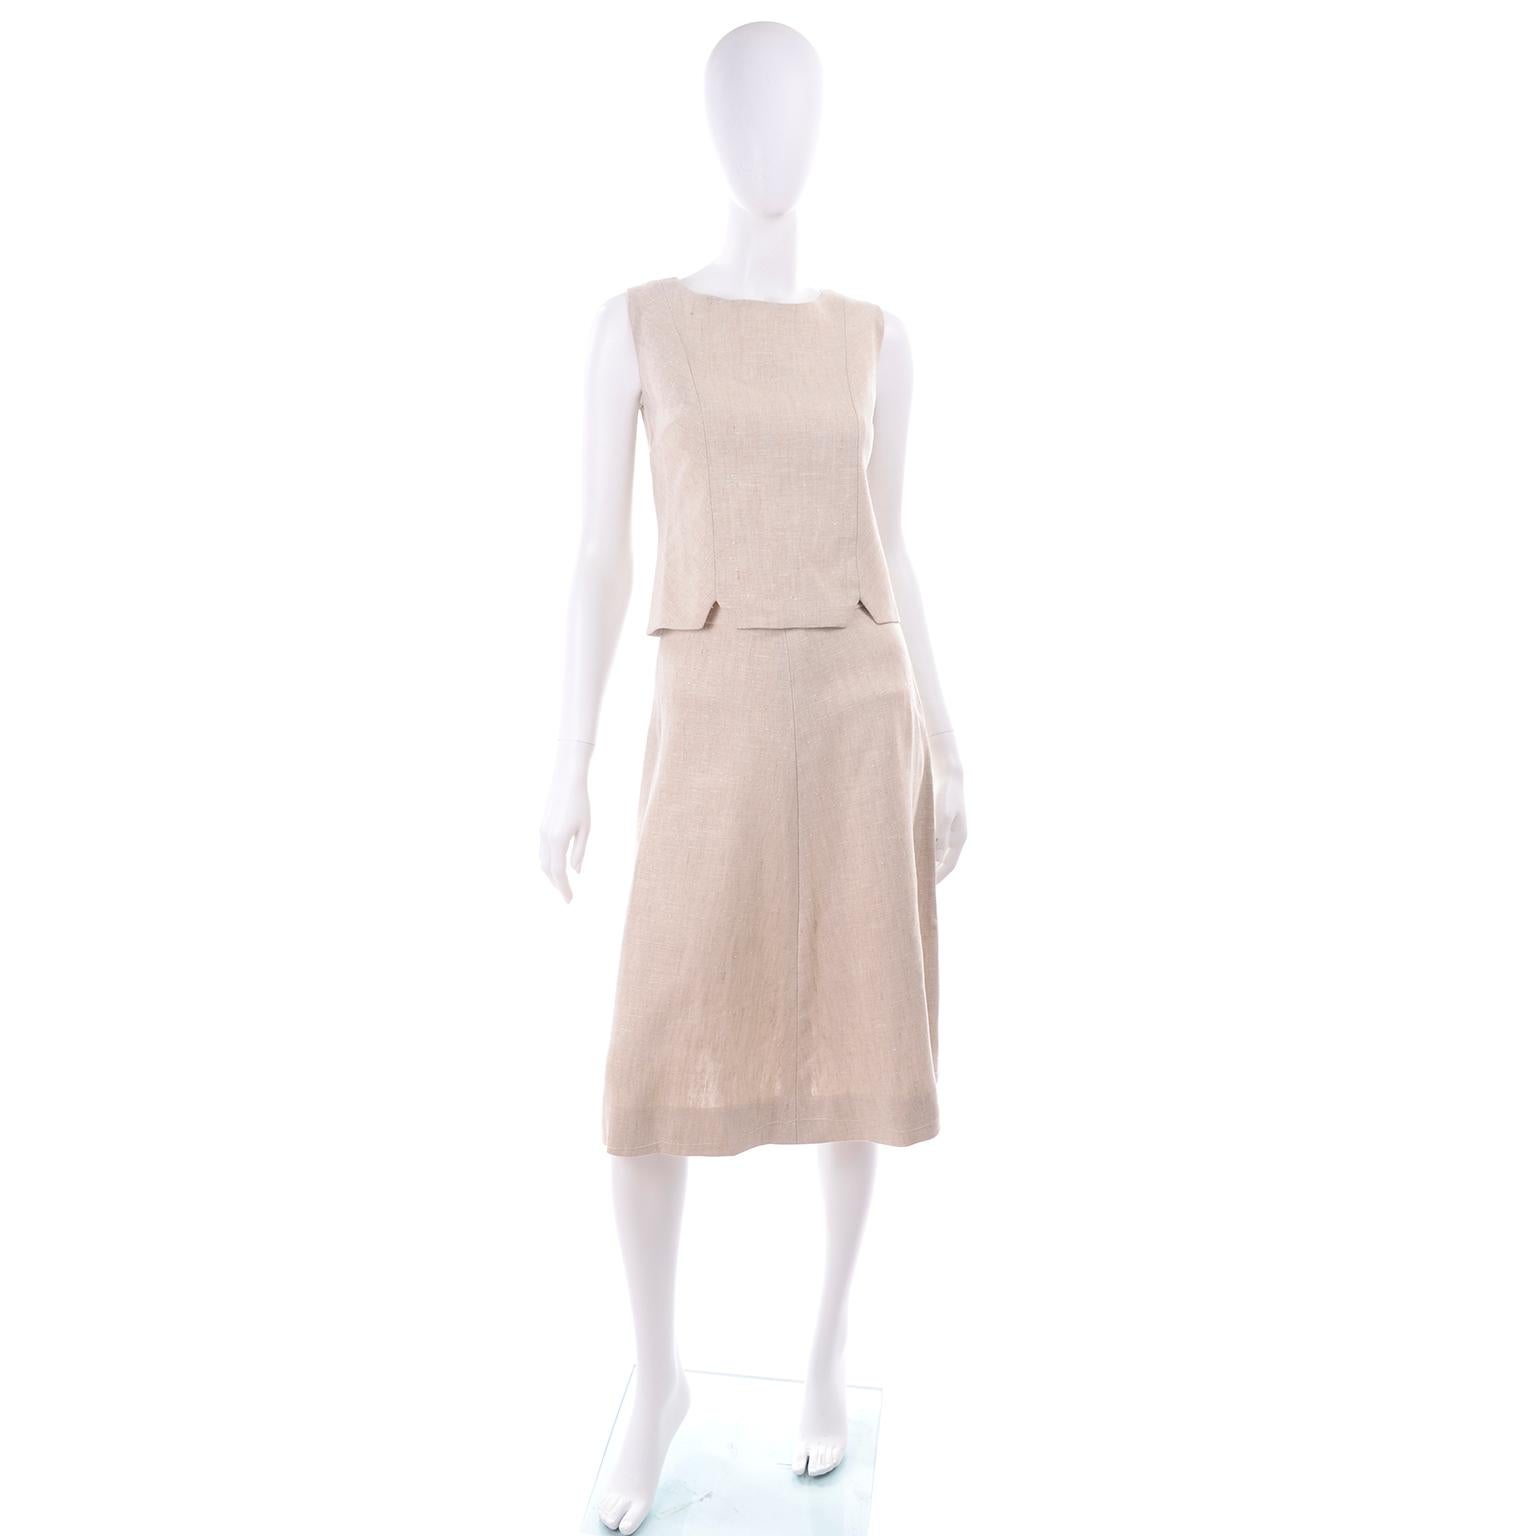 This is a 3 piece vintage mid century outfit in a luxe natural linen that includes a short sleeve jacket, a sleeveless top, and an a-line skirt.  The jacket has darts on the front and 2 functional pockets with buttons. The top is sleeveless with a